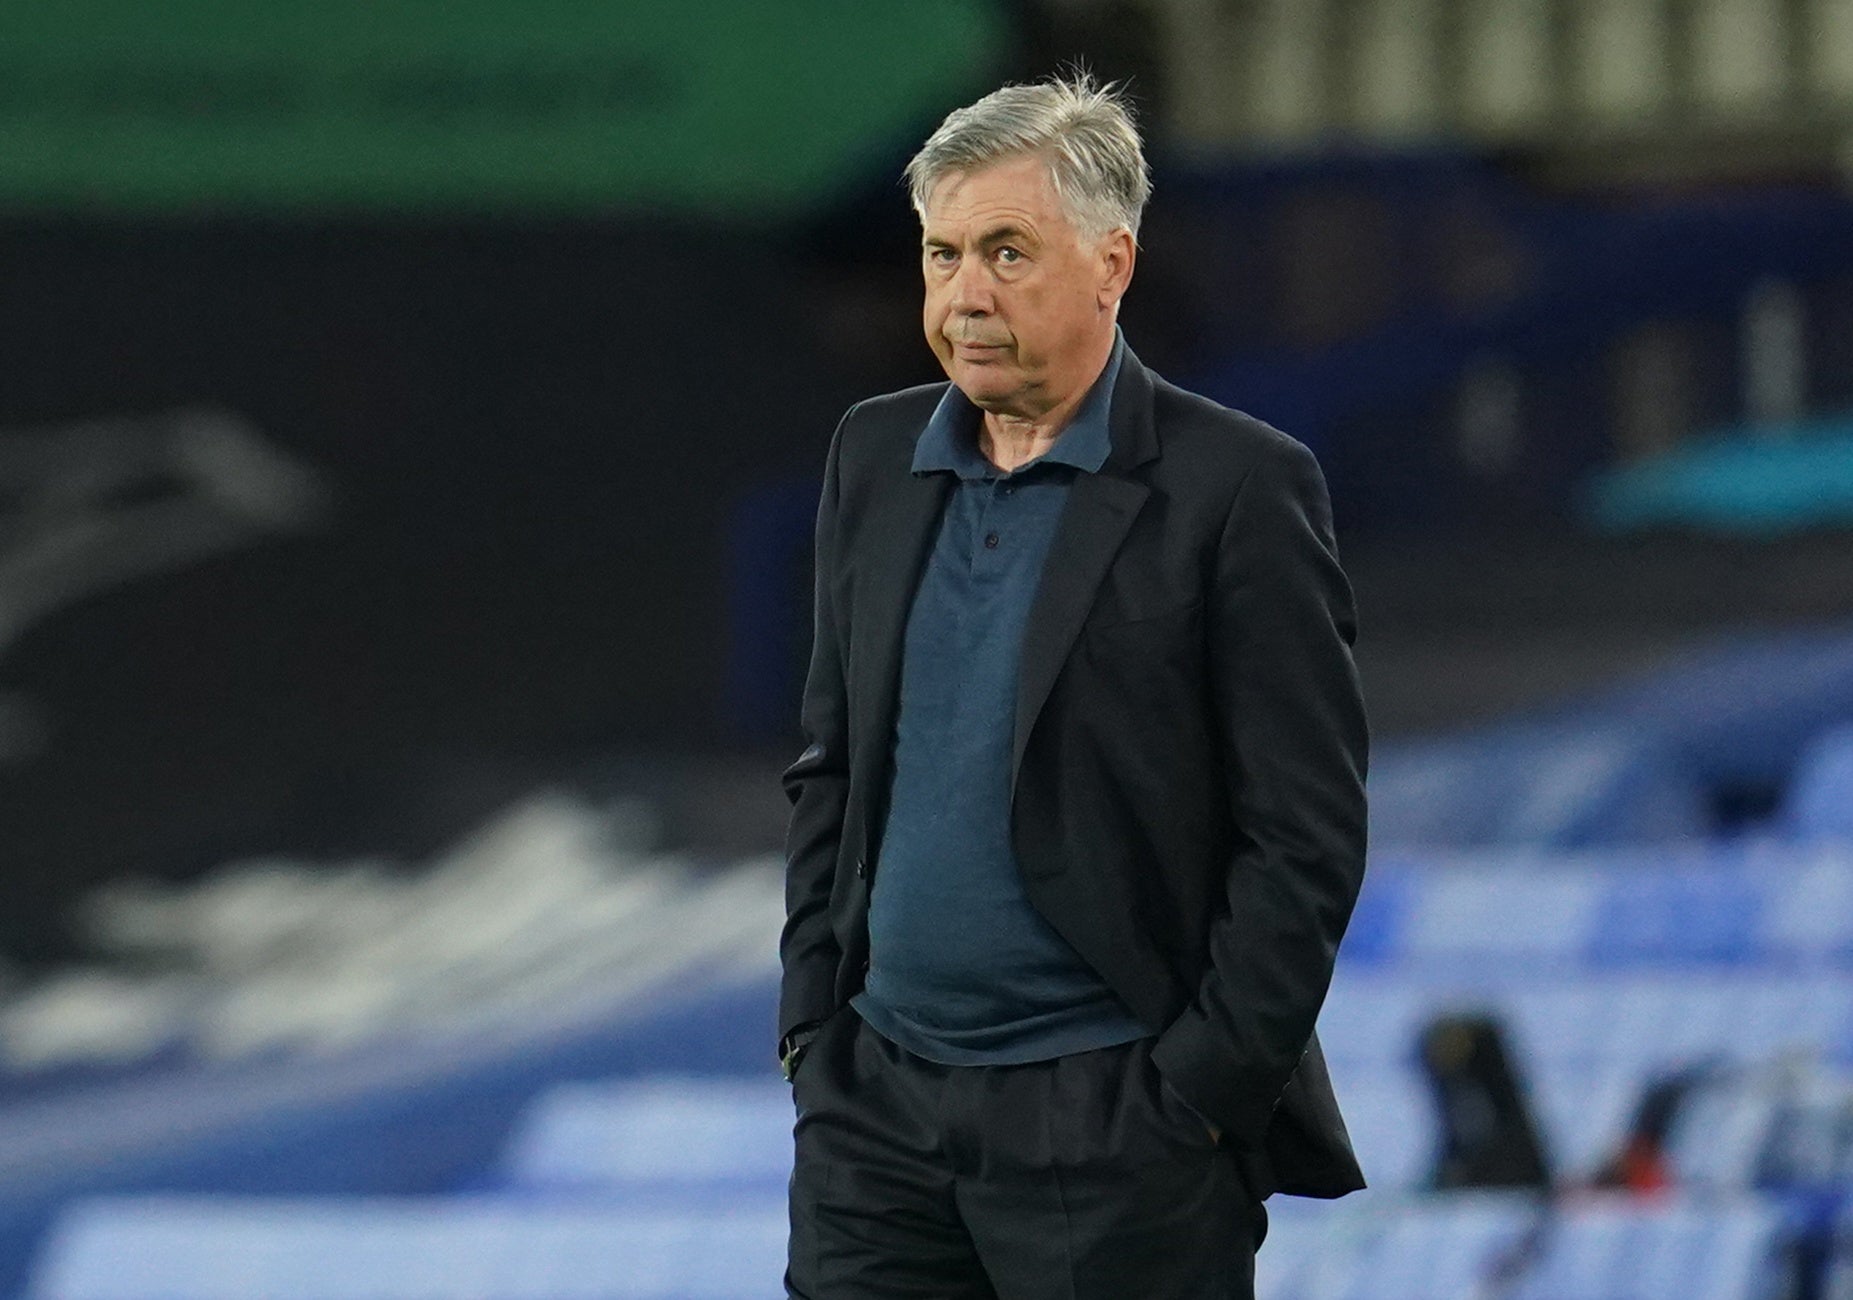 Everton manager Carlo Ancelotti wants to sign a new defender